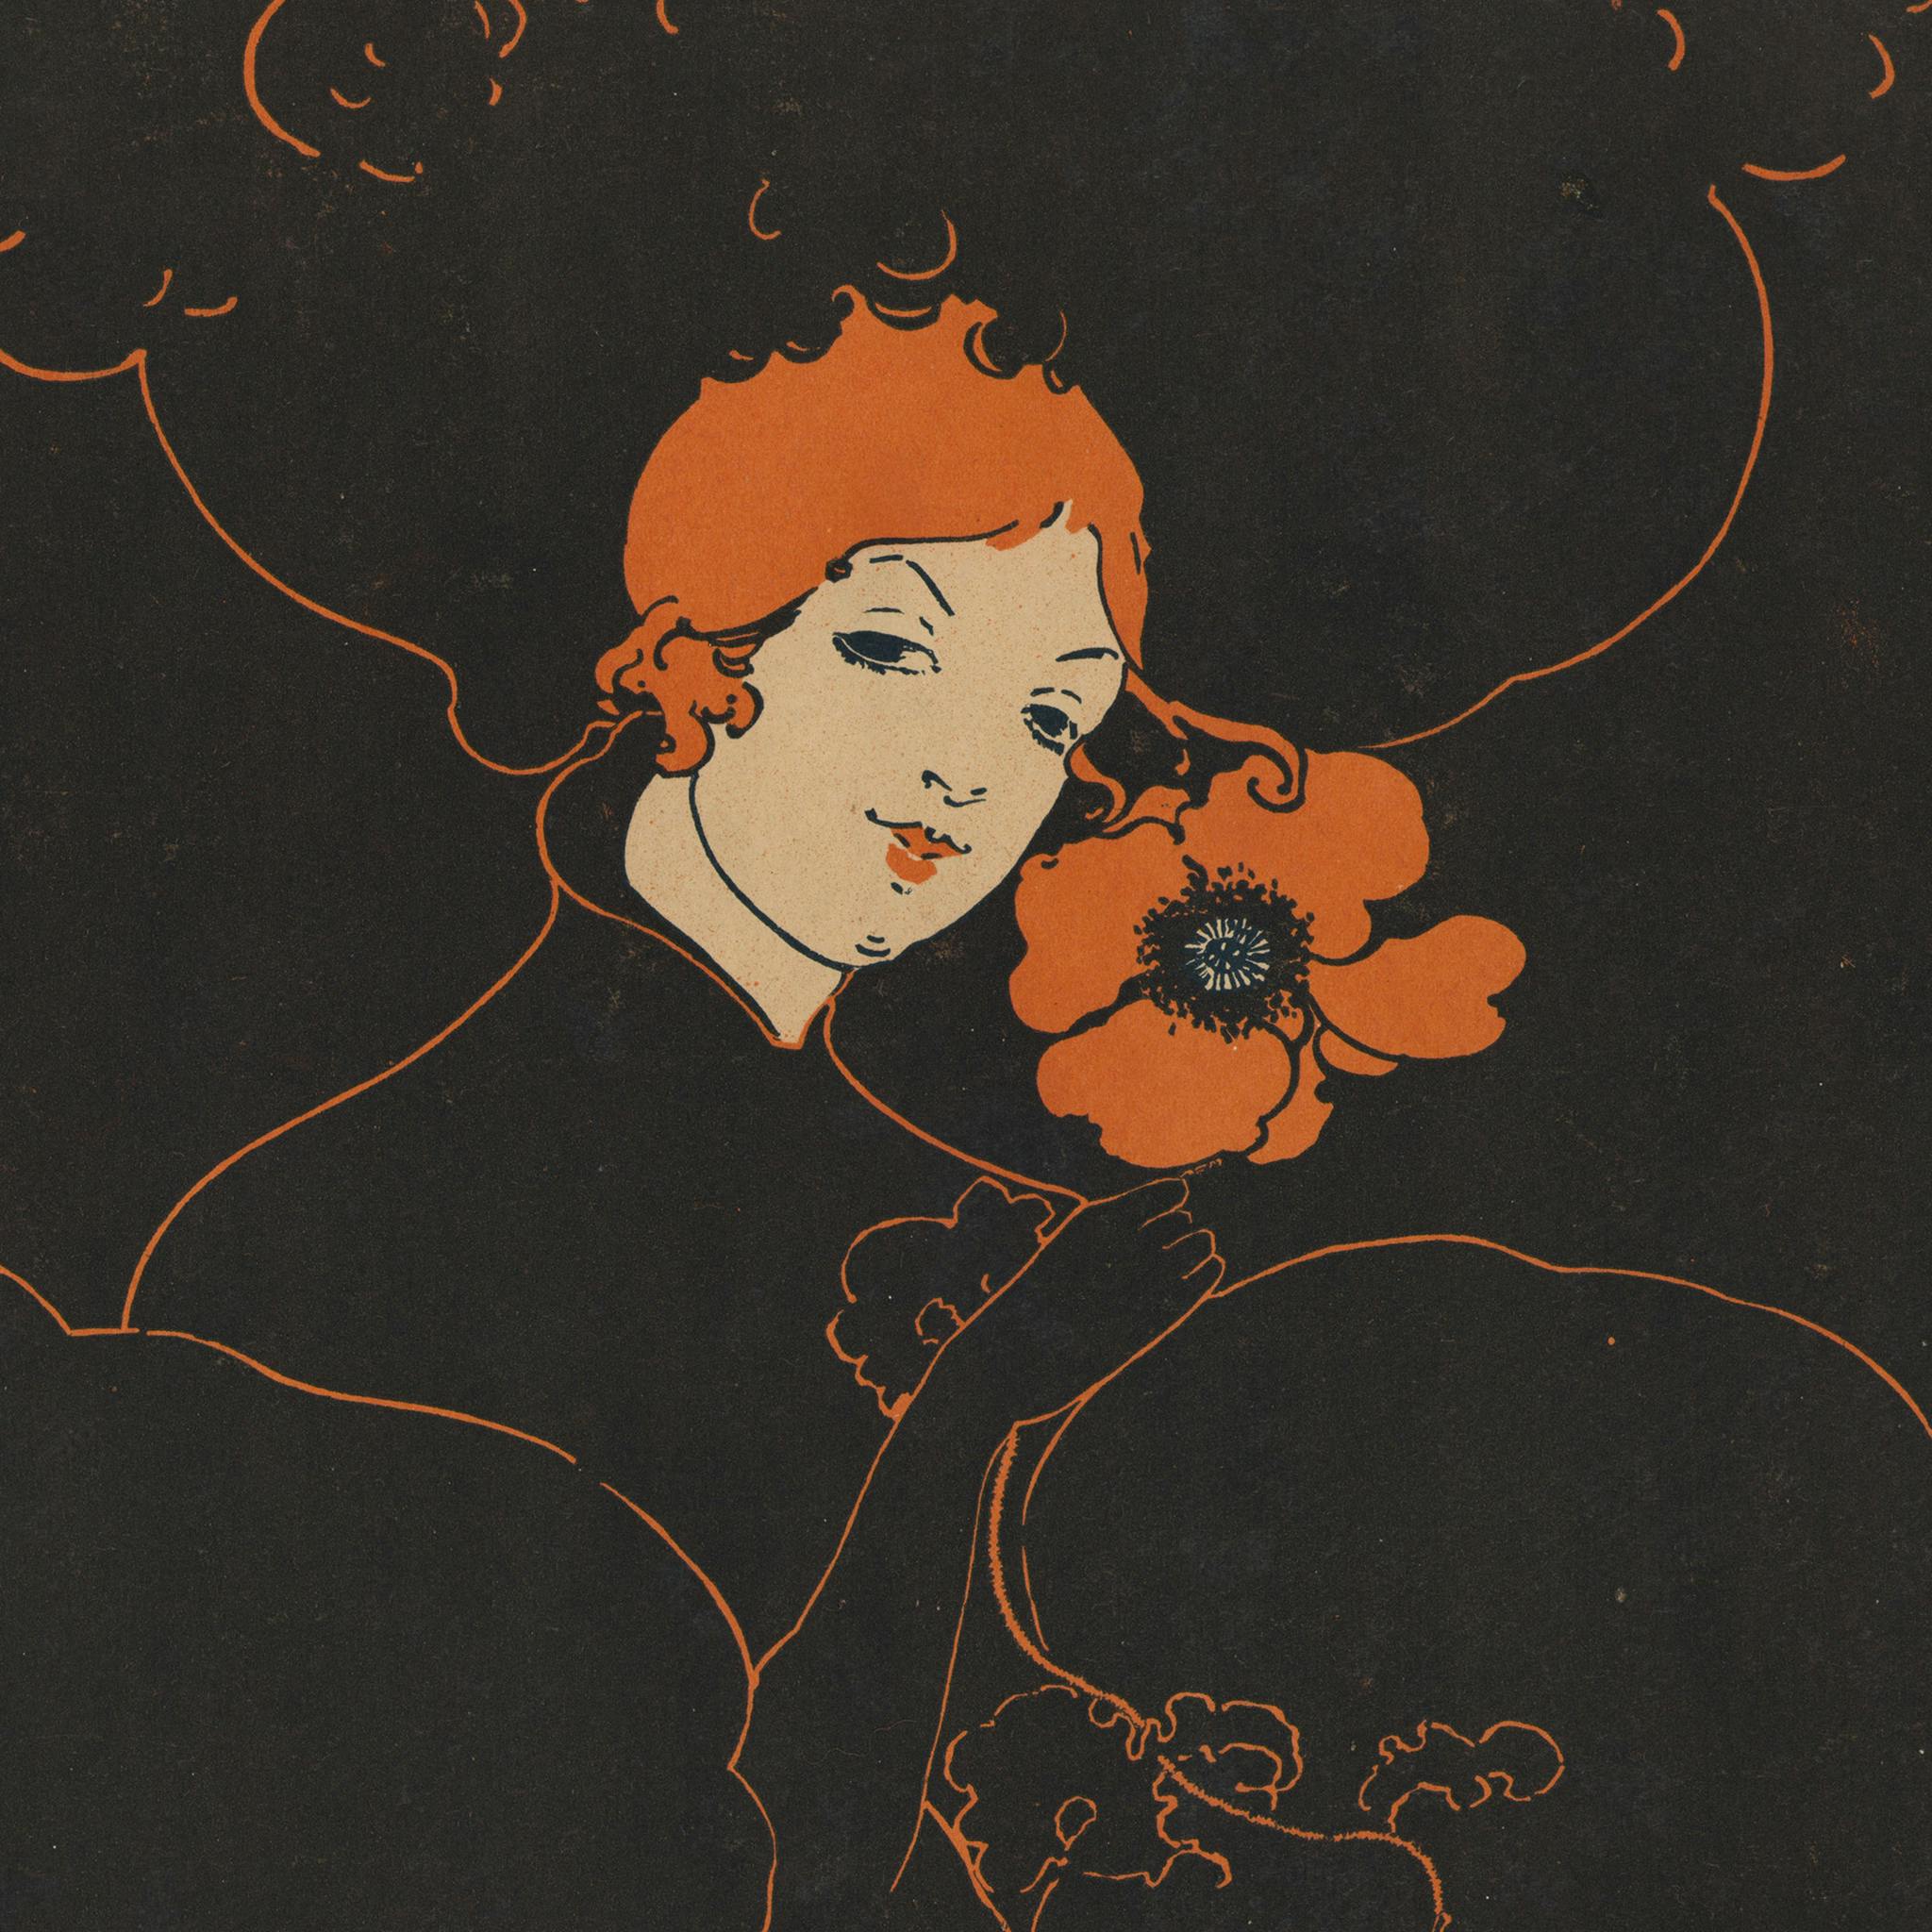 Printed graphic image of a white woman seductively holding a poppy flower. The Woman and the peony are an orange color and the background of the image is black and the woman's dress and hat are created just using orange outlines.